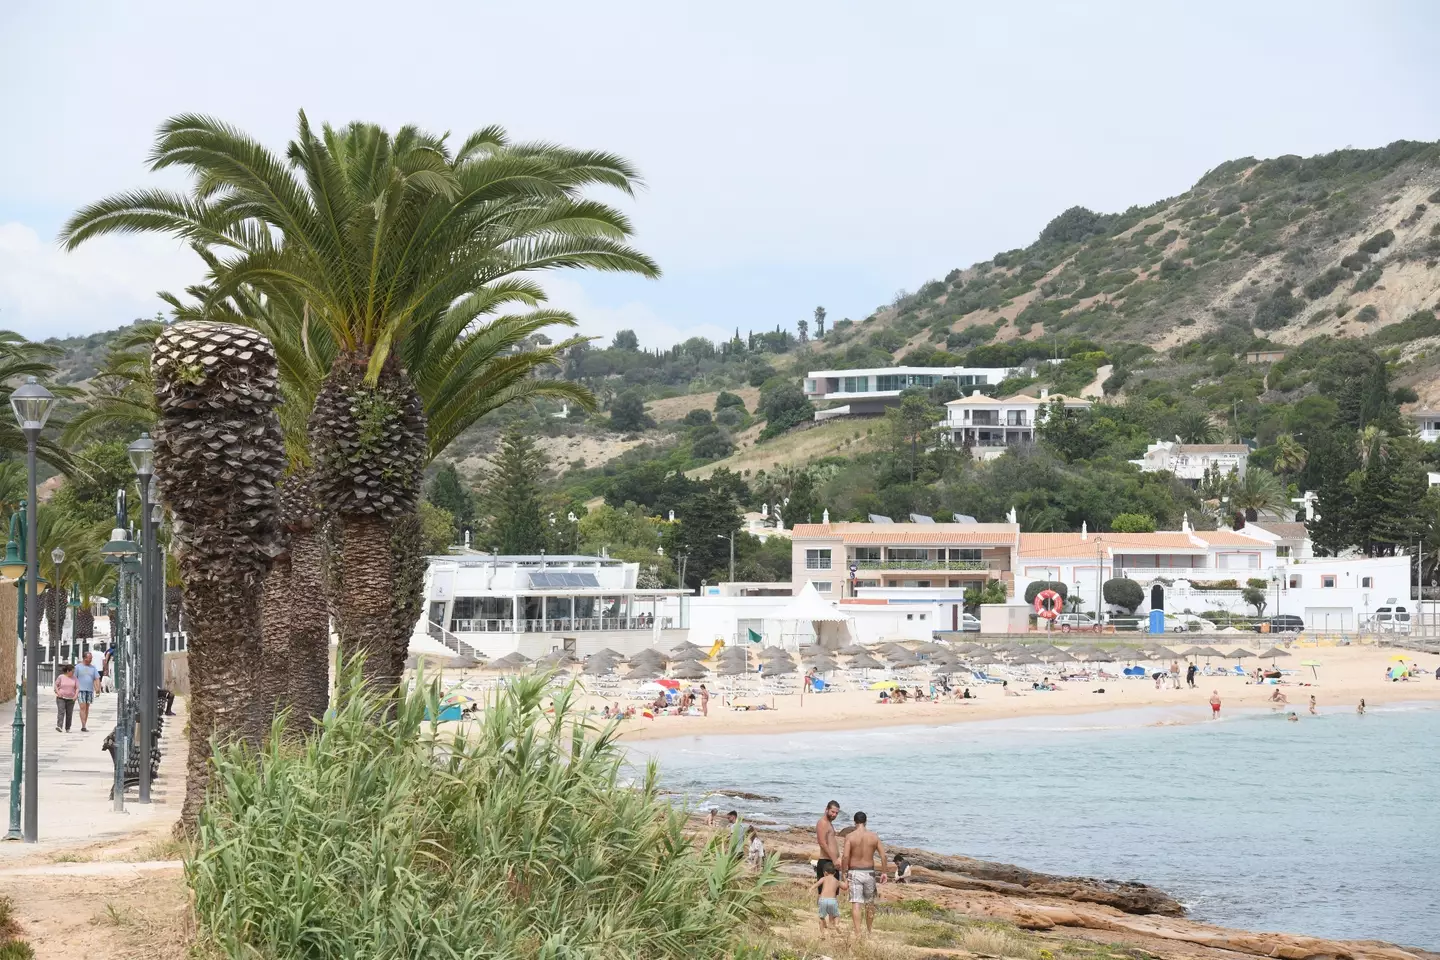 Madeleine went missing from her family's apartment in 2007 while on holiday in Praia da Luz.